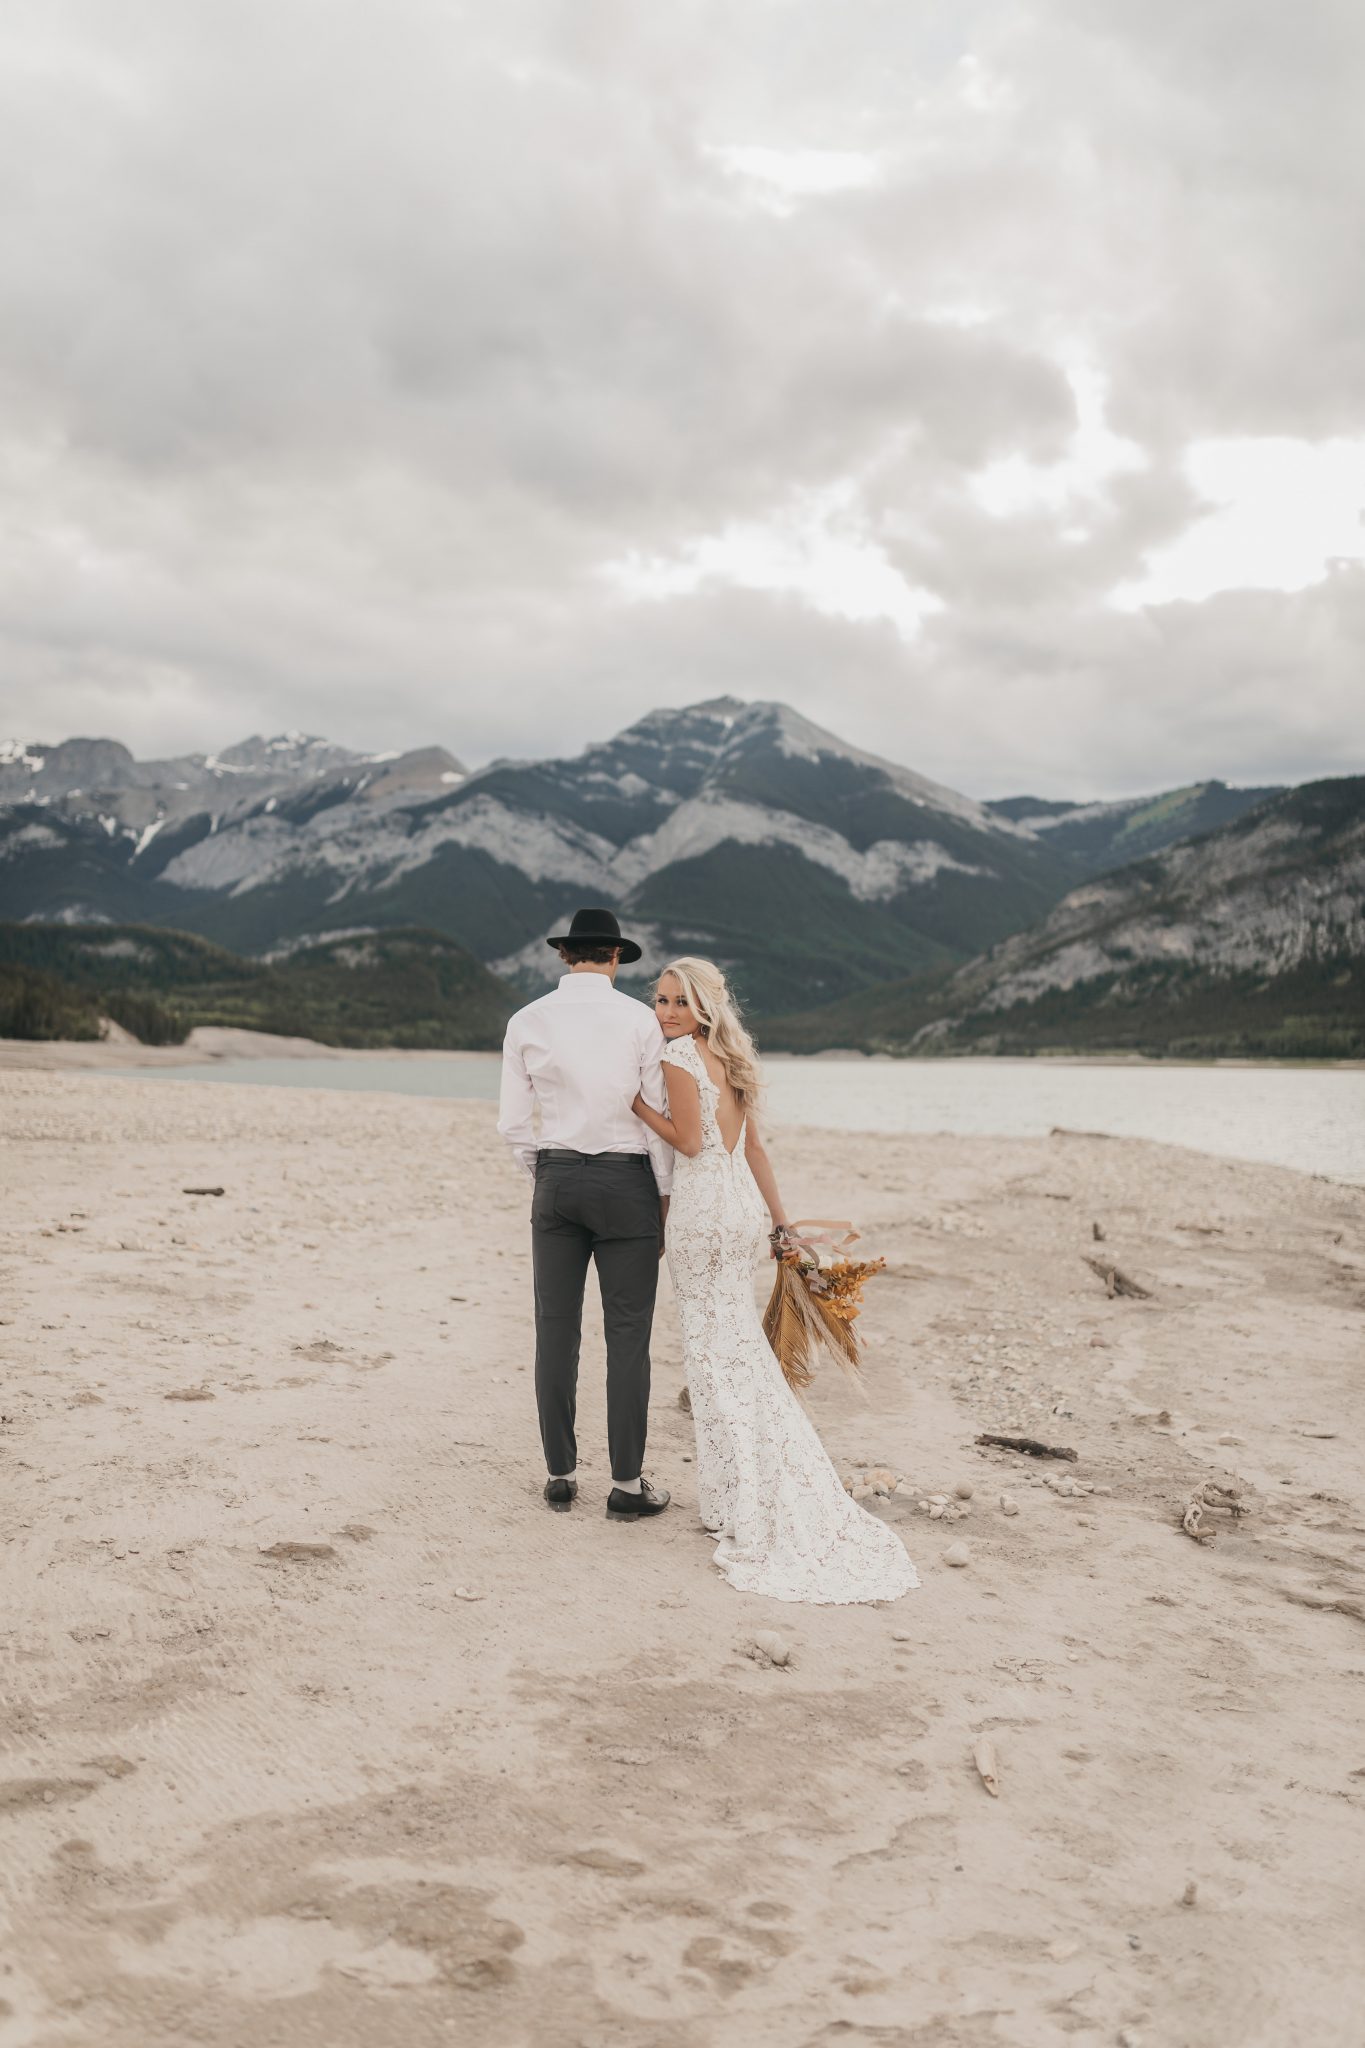 Elopement Advice from an Elopement Photographer: 5 Tips To Help You Plan Your Perfect Elopement